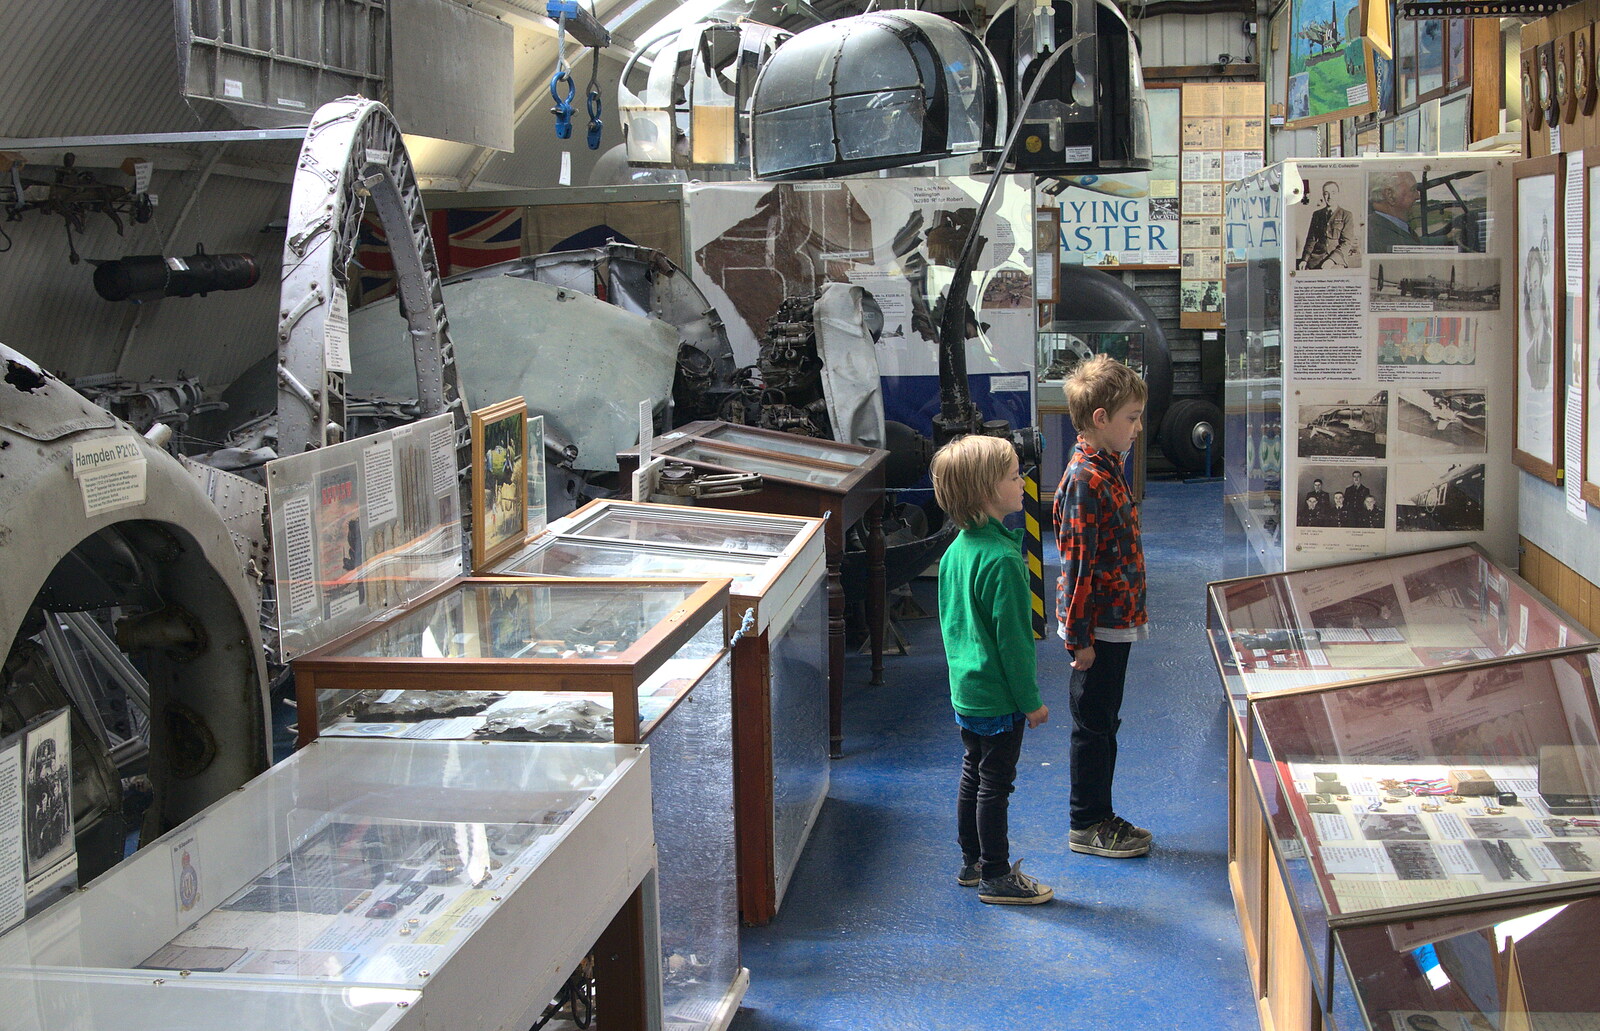 The boys look at more exhibits from Norfolk and Suffolk Aviation Museum, Flixton, Suffolk - 30th April 2017